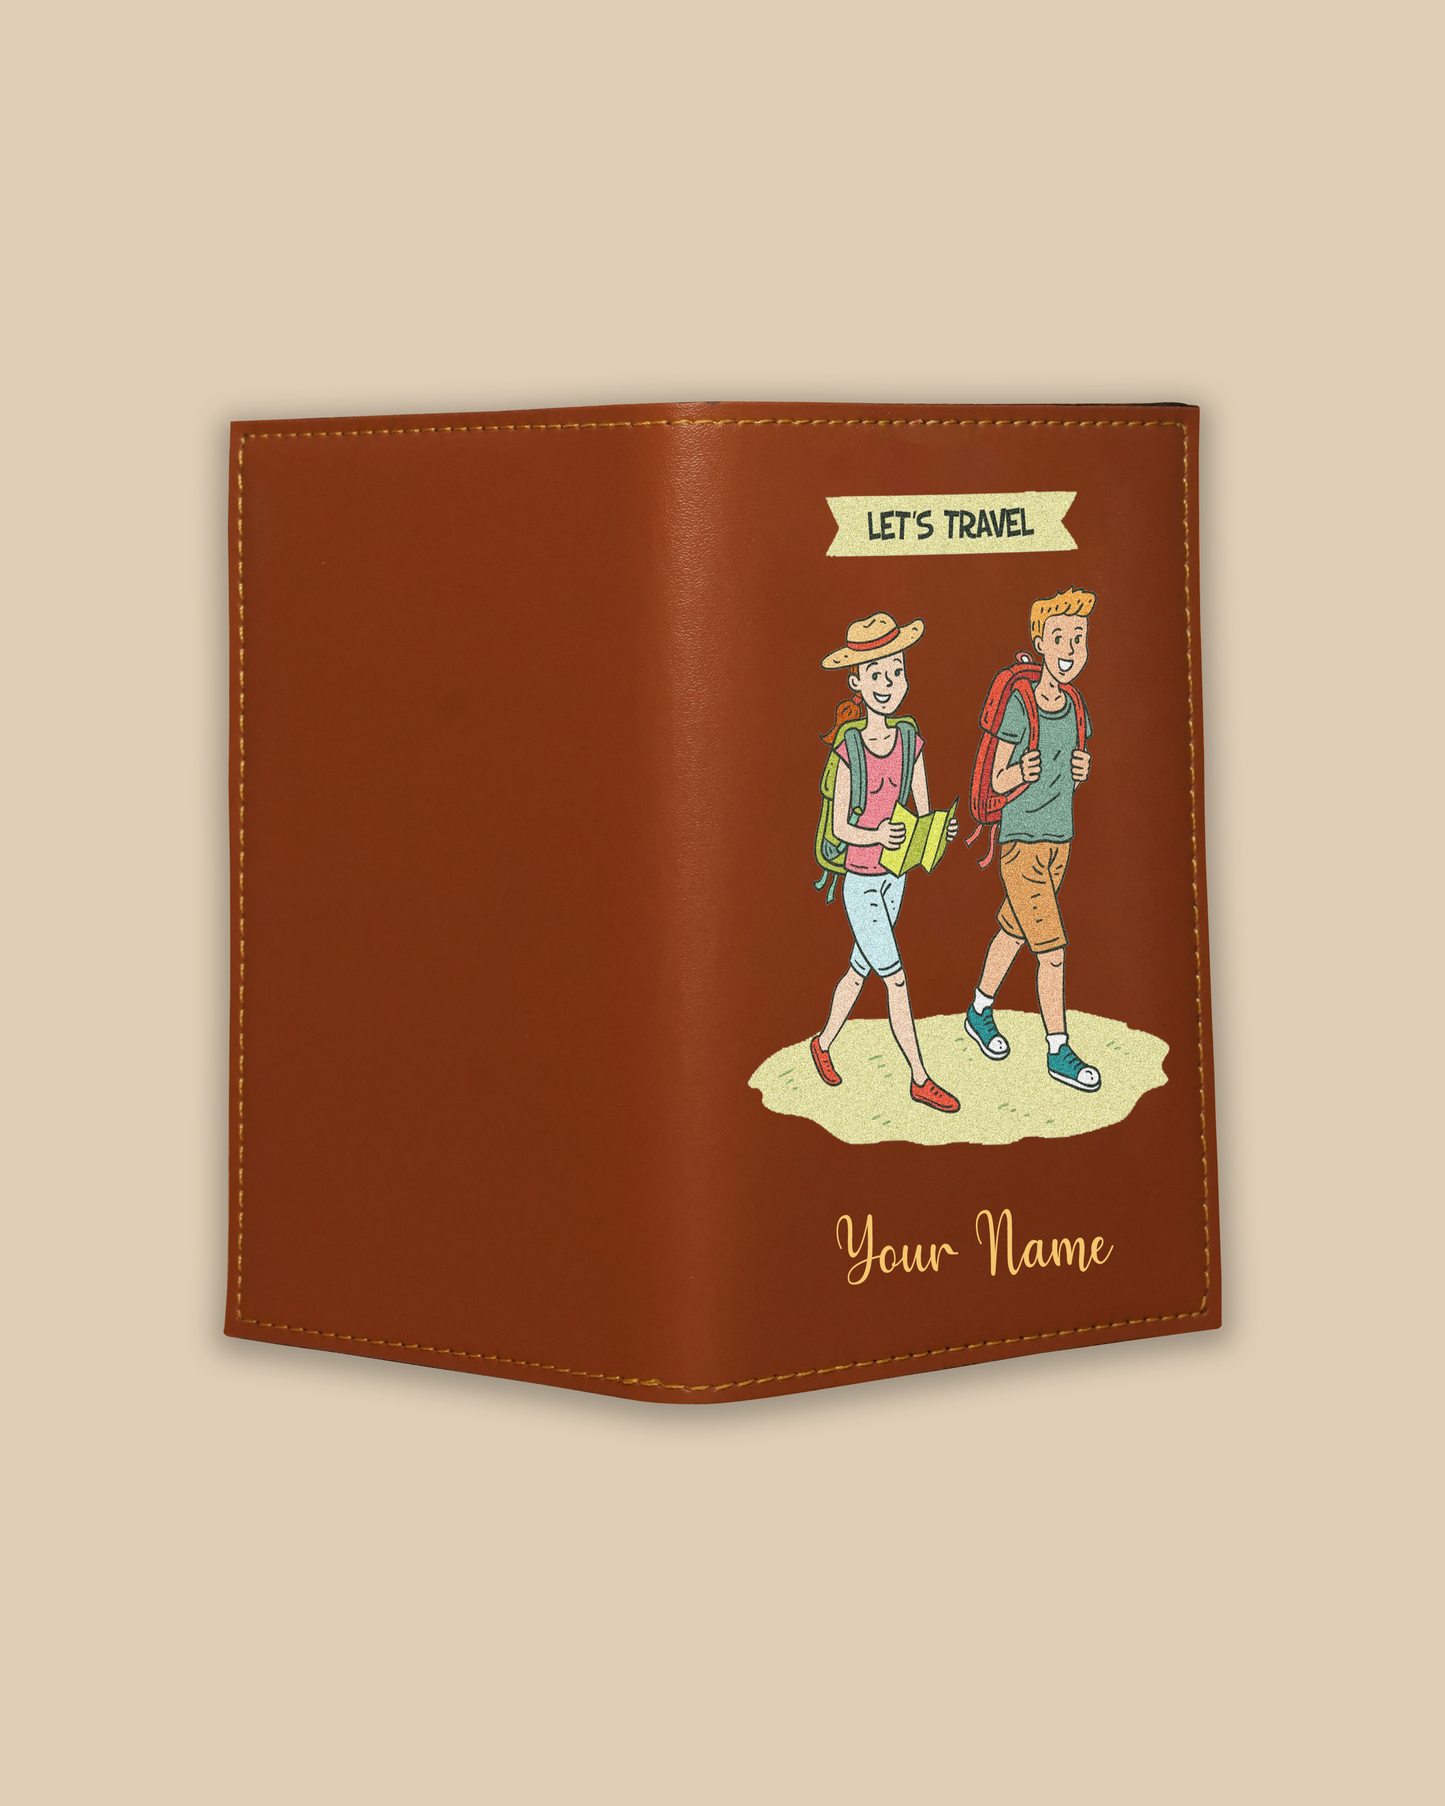 Customized Passport Cover -  LET'S TRAVEL